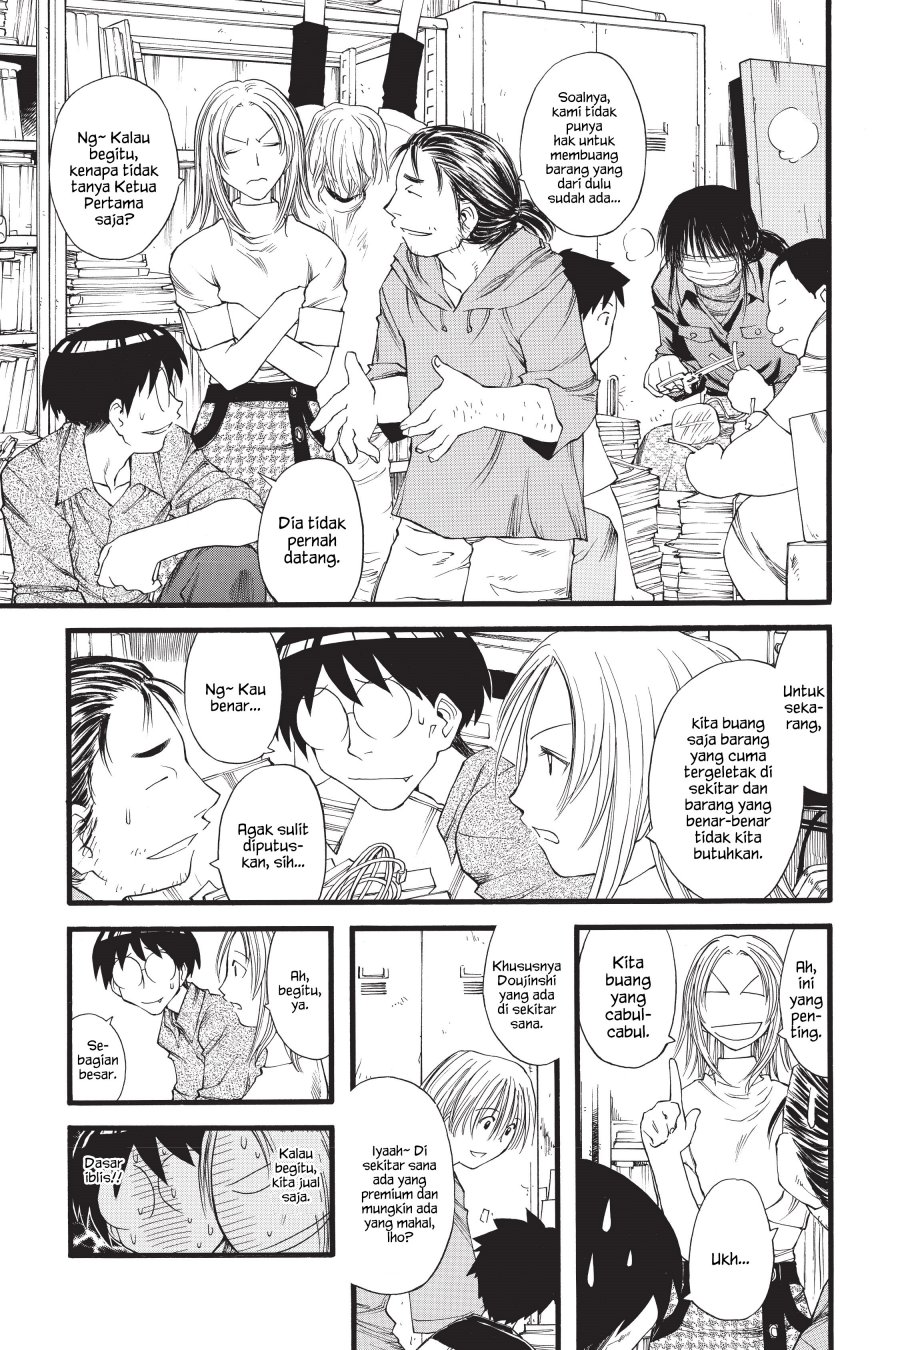 Genshiken – The Society for the Study of Modern Visual Culture Chapter 18 Image 12